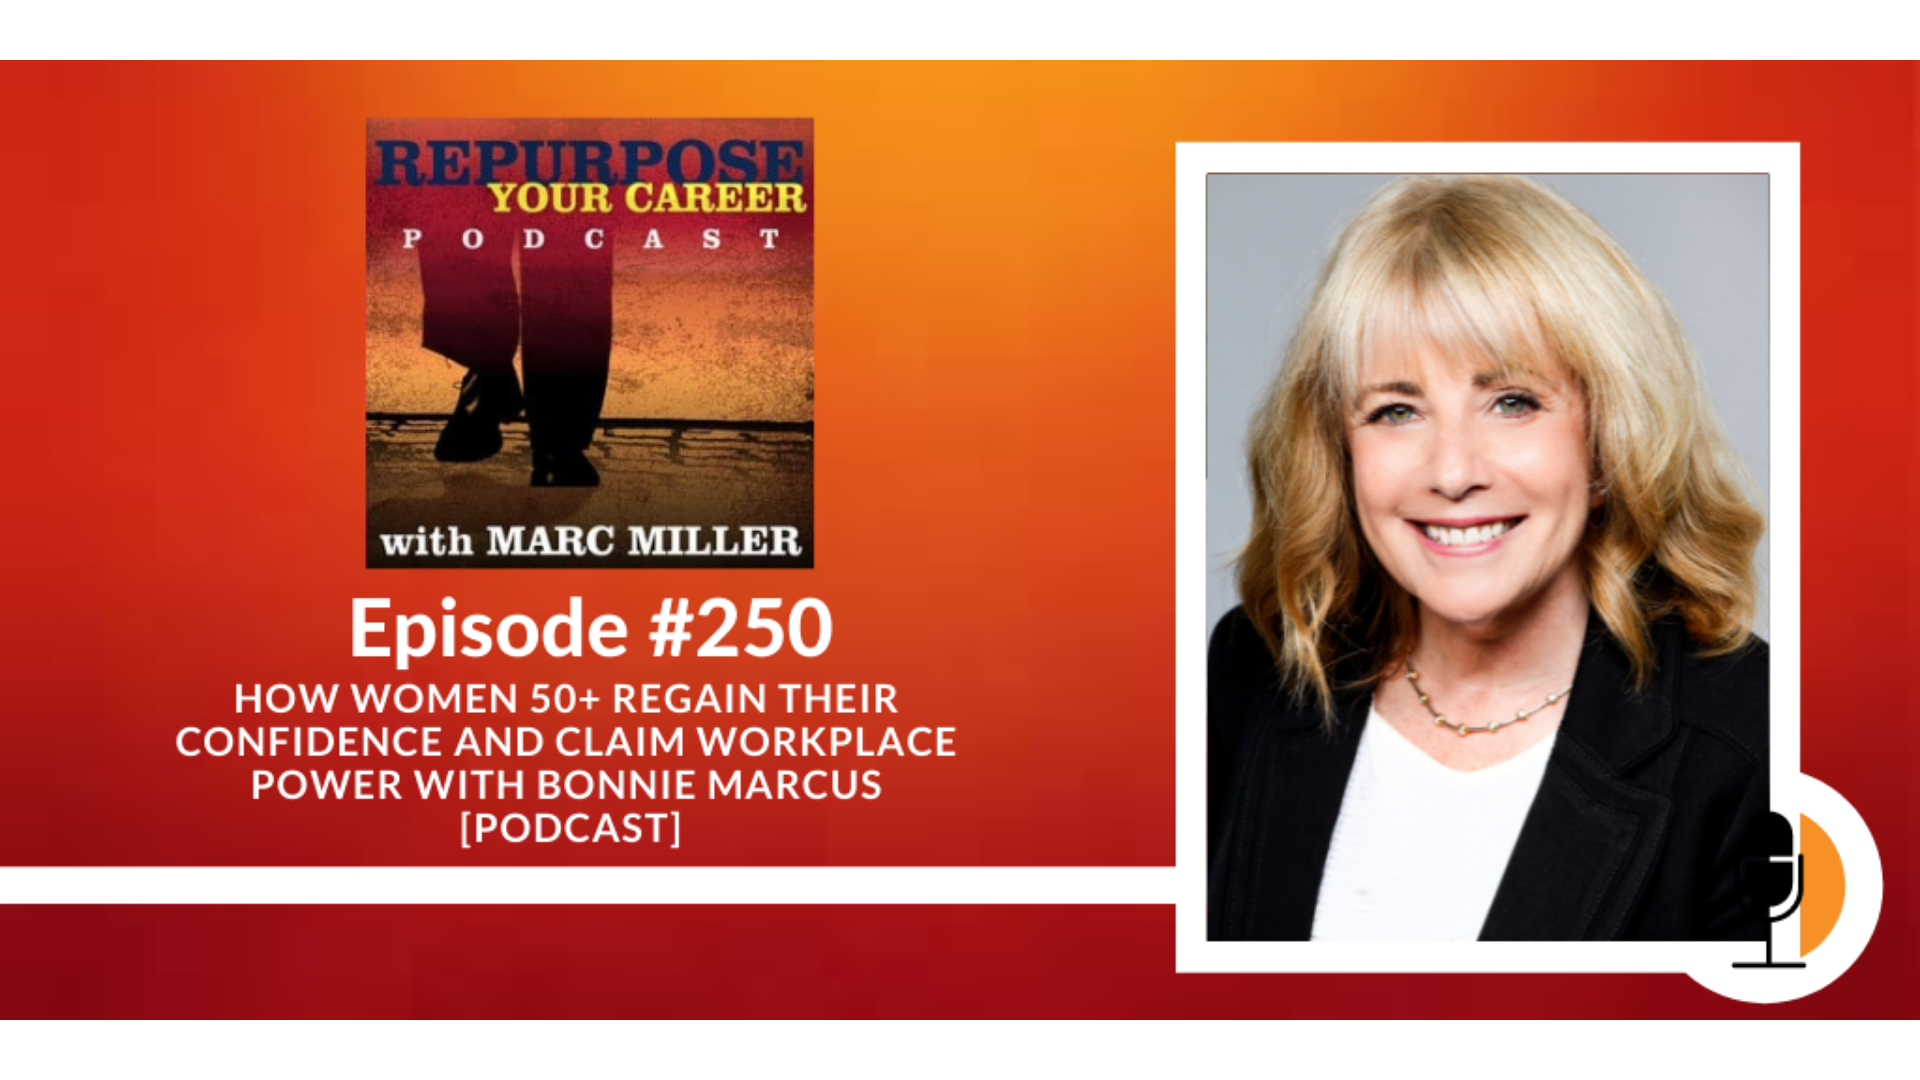 How Women 50+ Regain Their Confidence and Claim Workplace Power [Podcast]